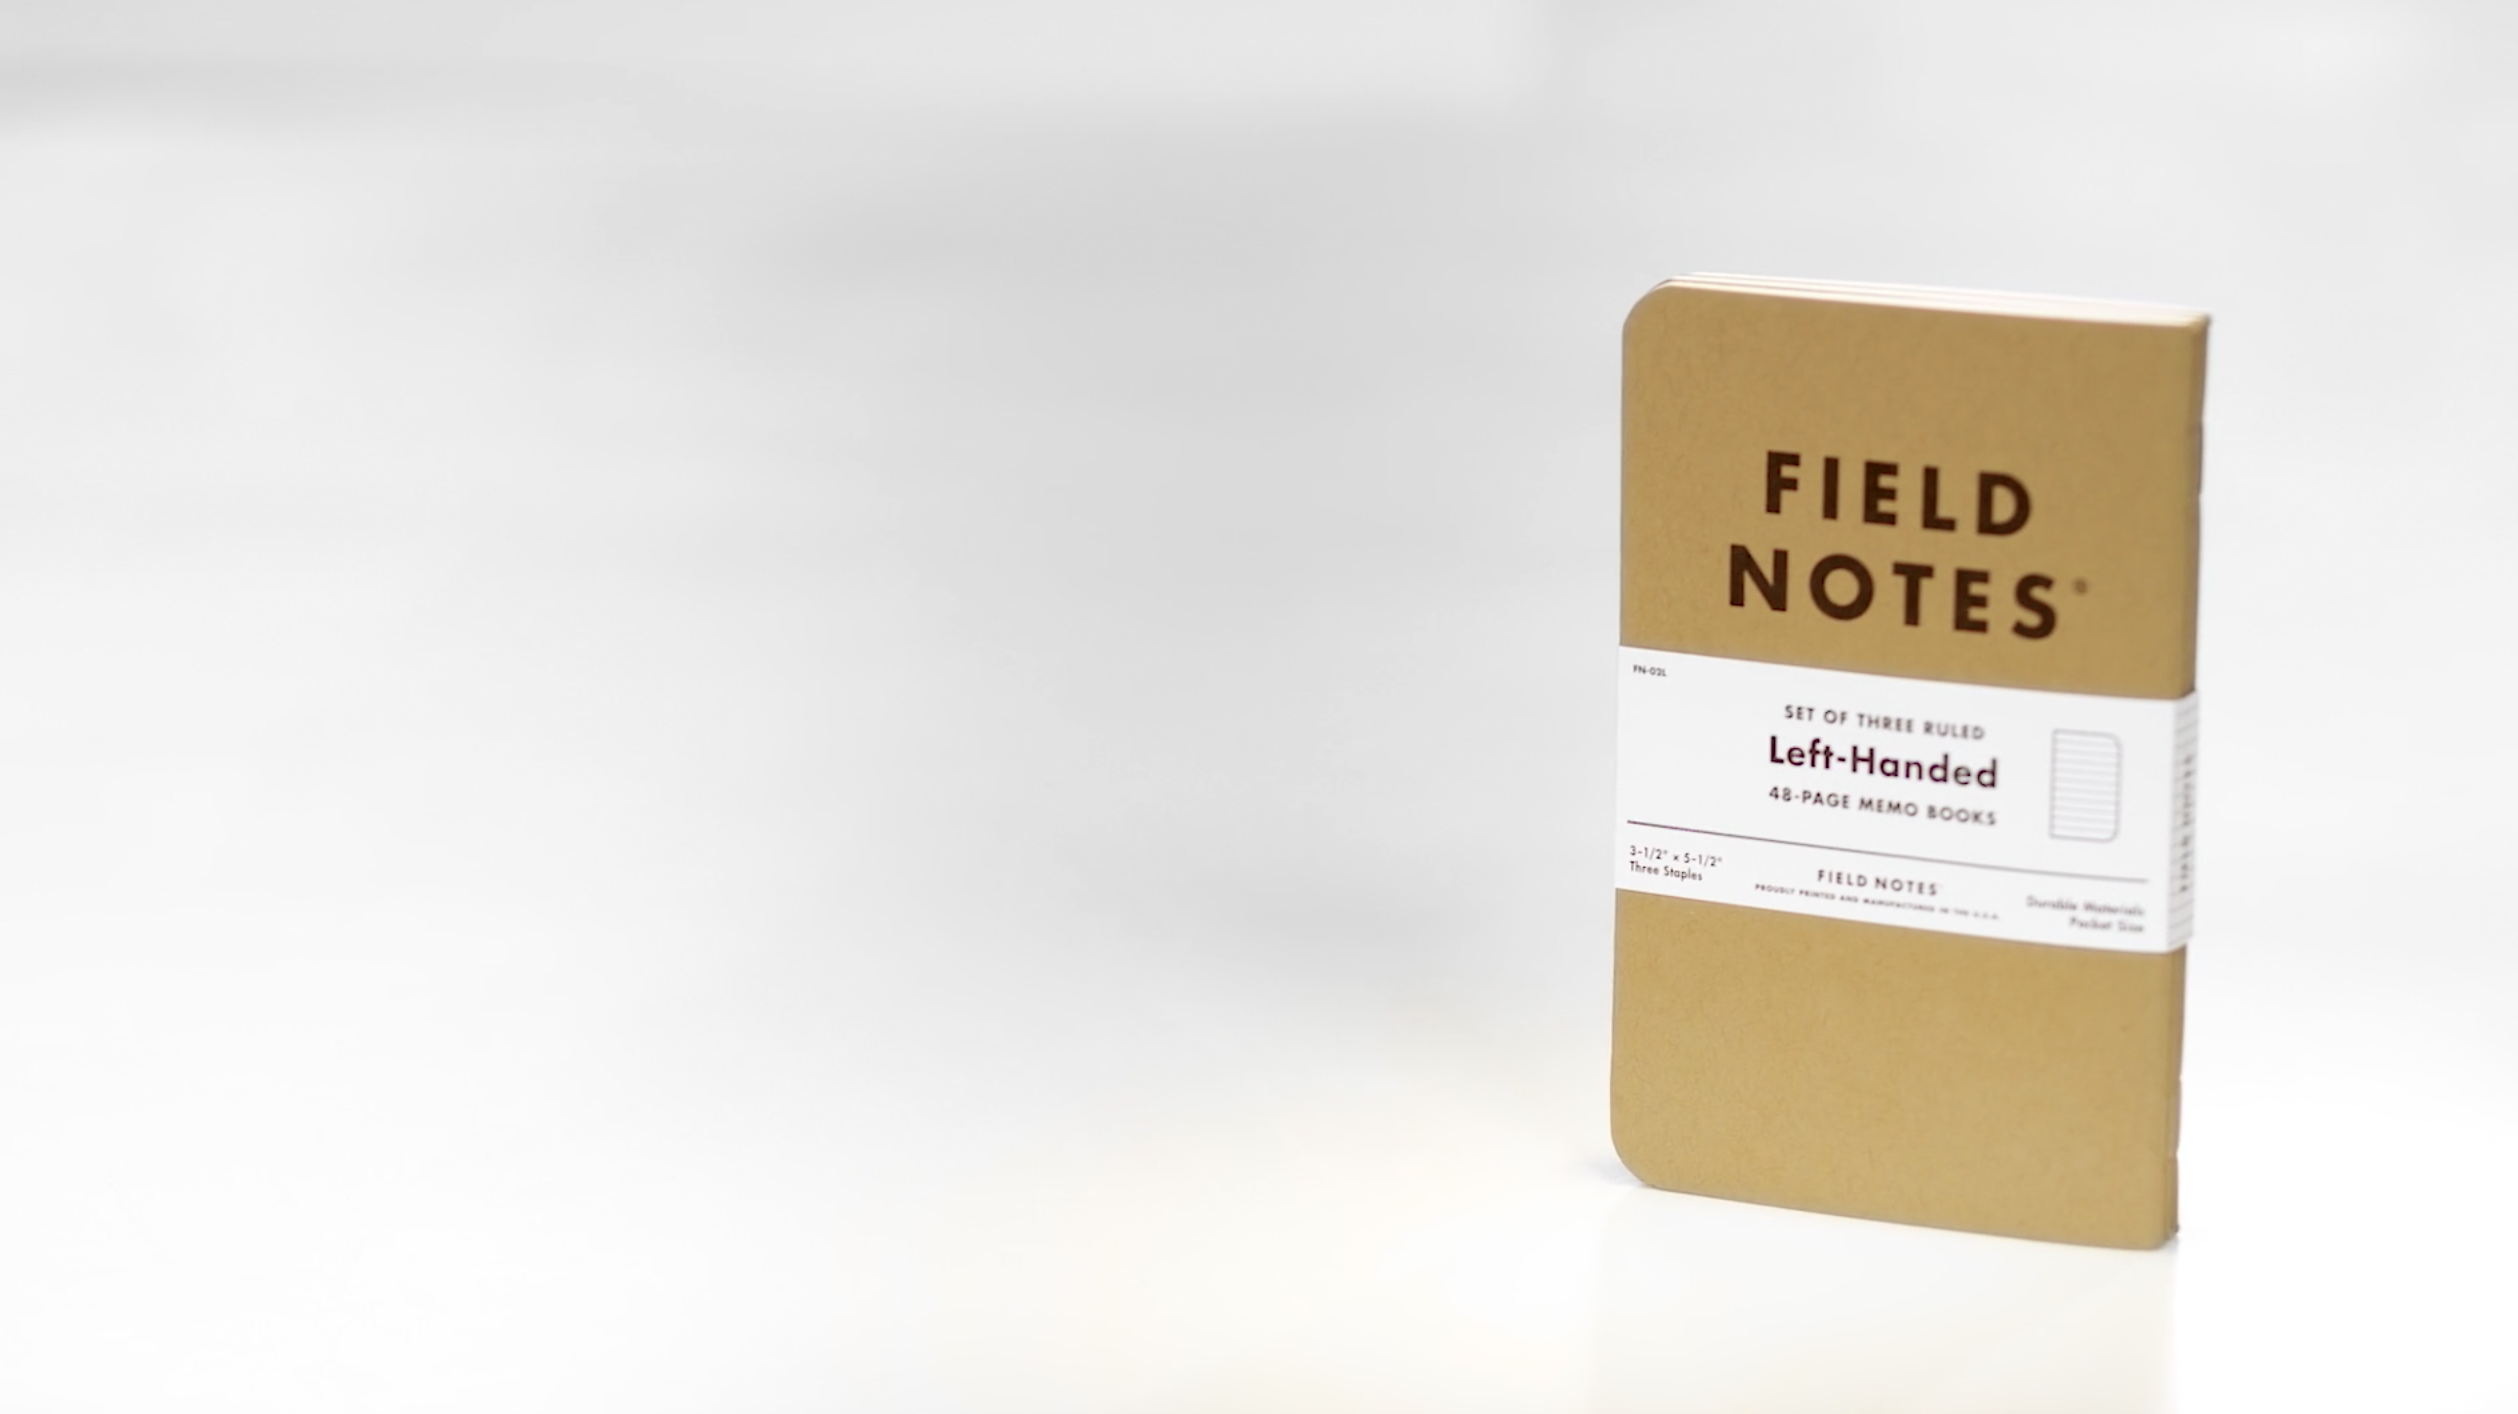 Field Notes Left-handed (3-Pack)